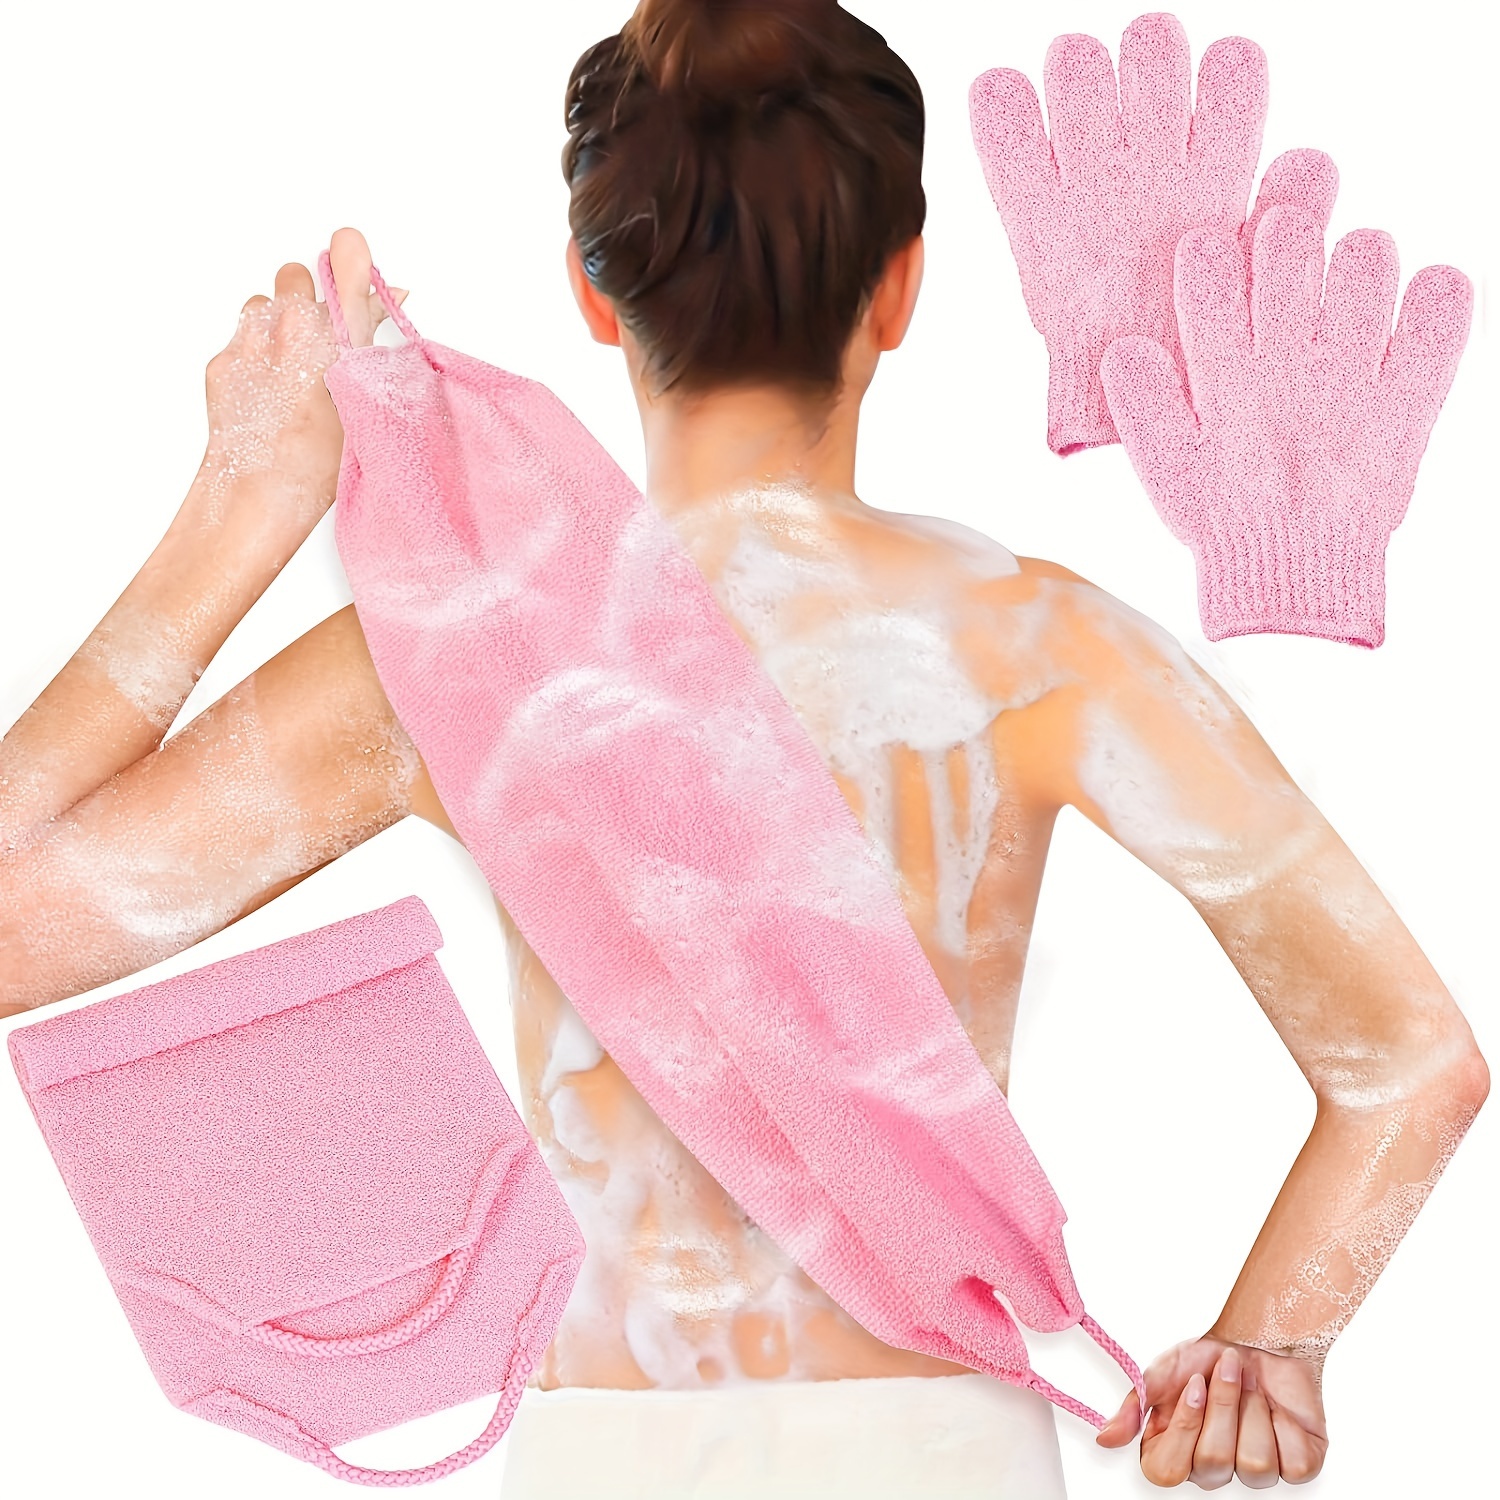 

comfortreach" Exfoliating Back Scrubber Towel & Gloves Set - Nylon, Stretchable With Handles For Easy Reach, Personal Care Essentials